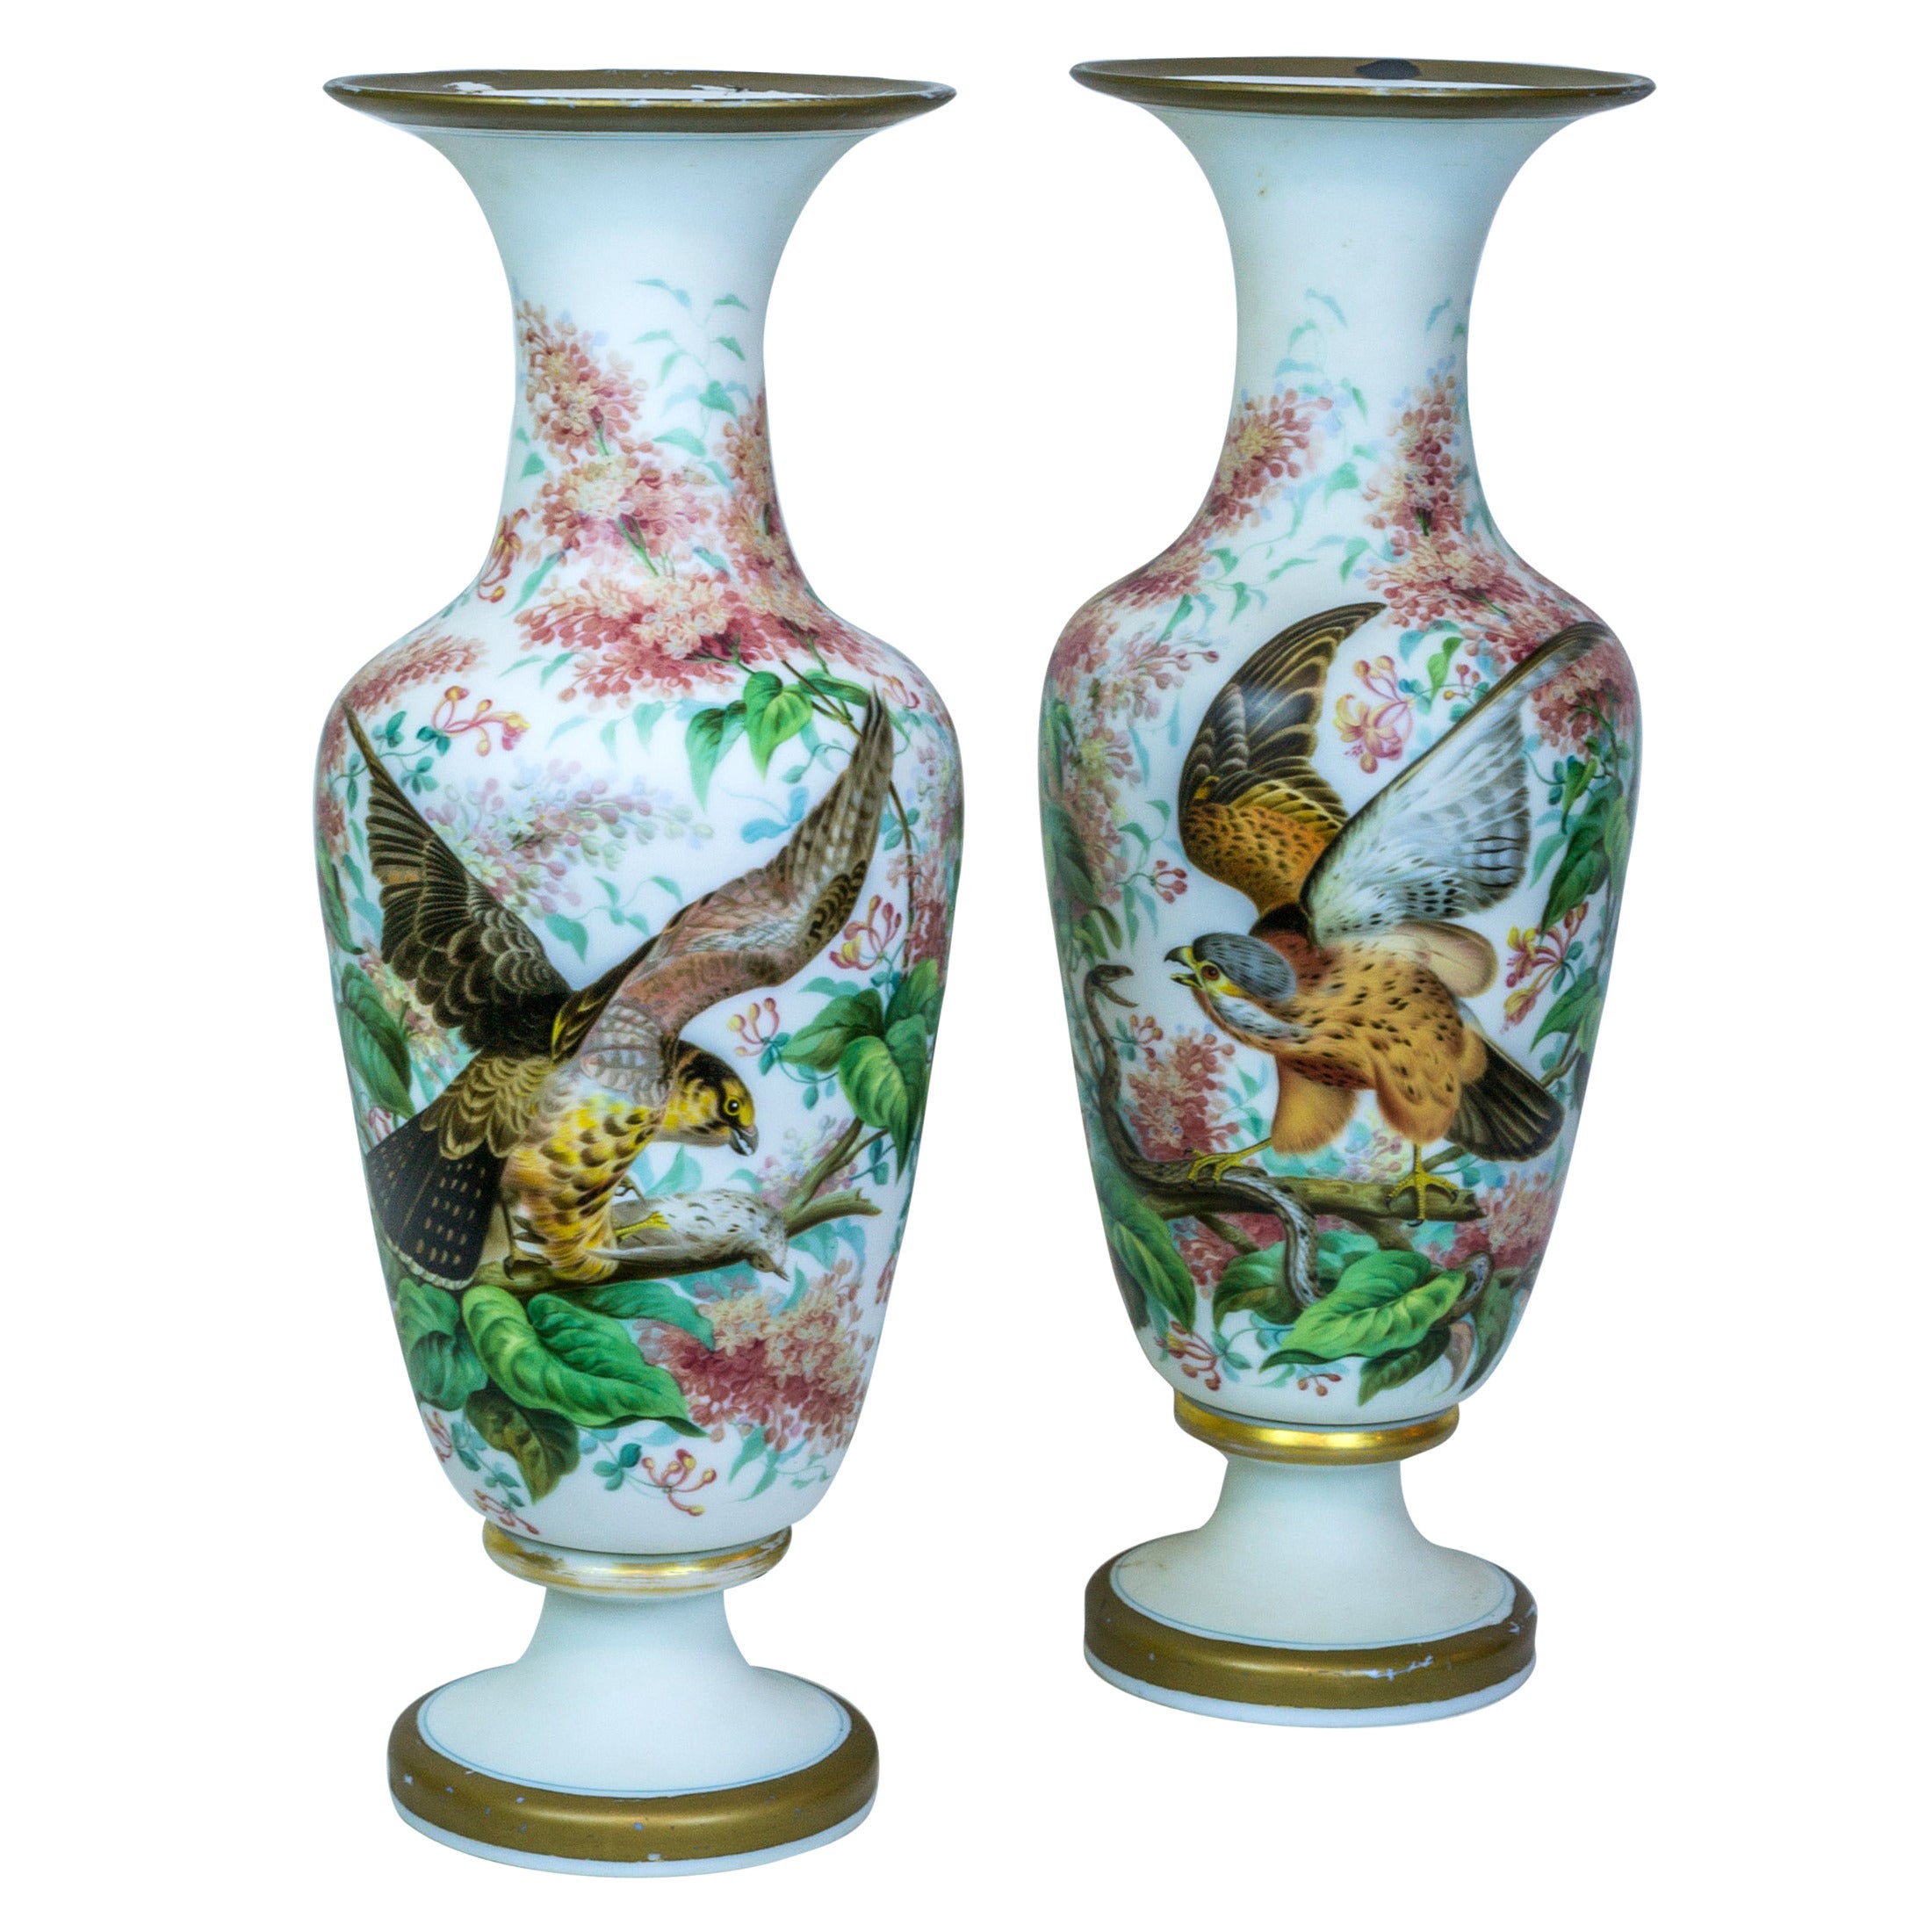 Large Pair of Tall Opaline Vases with Painted Bird and Floral Decorations